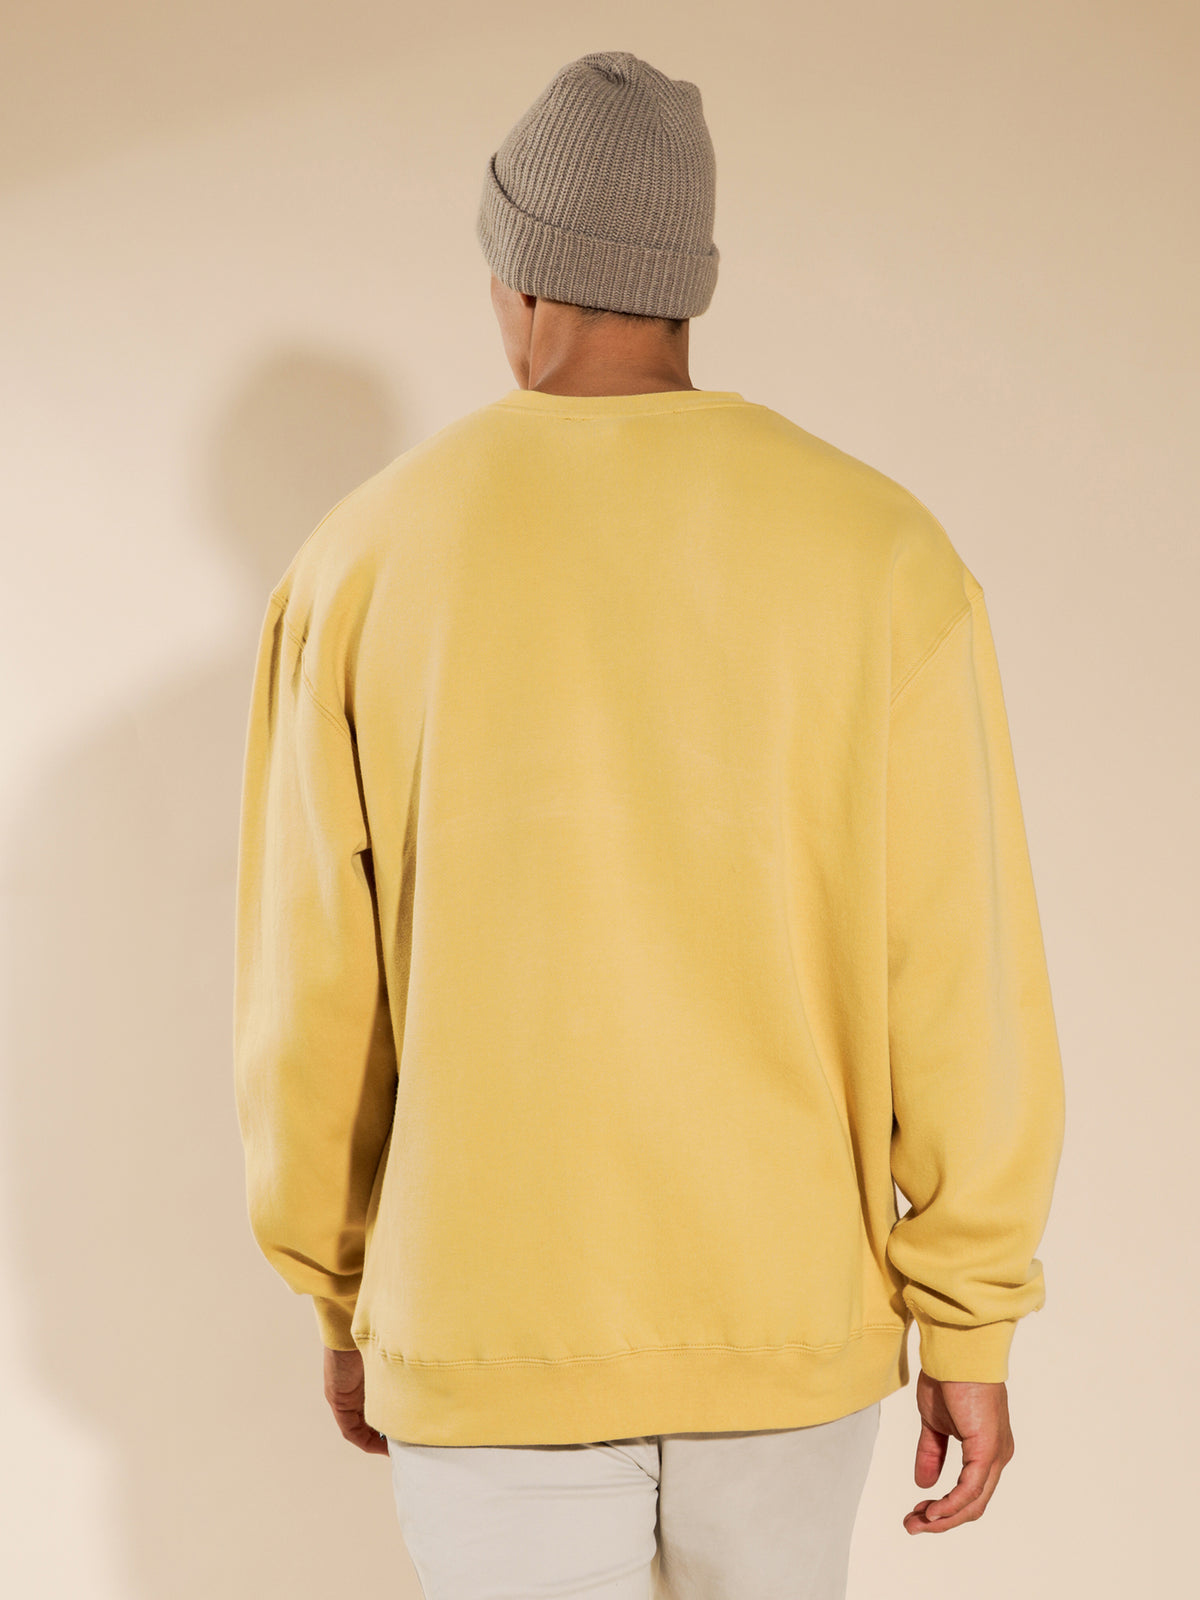 City Stack Jumper in Butter